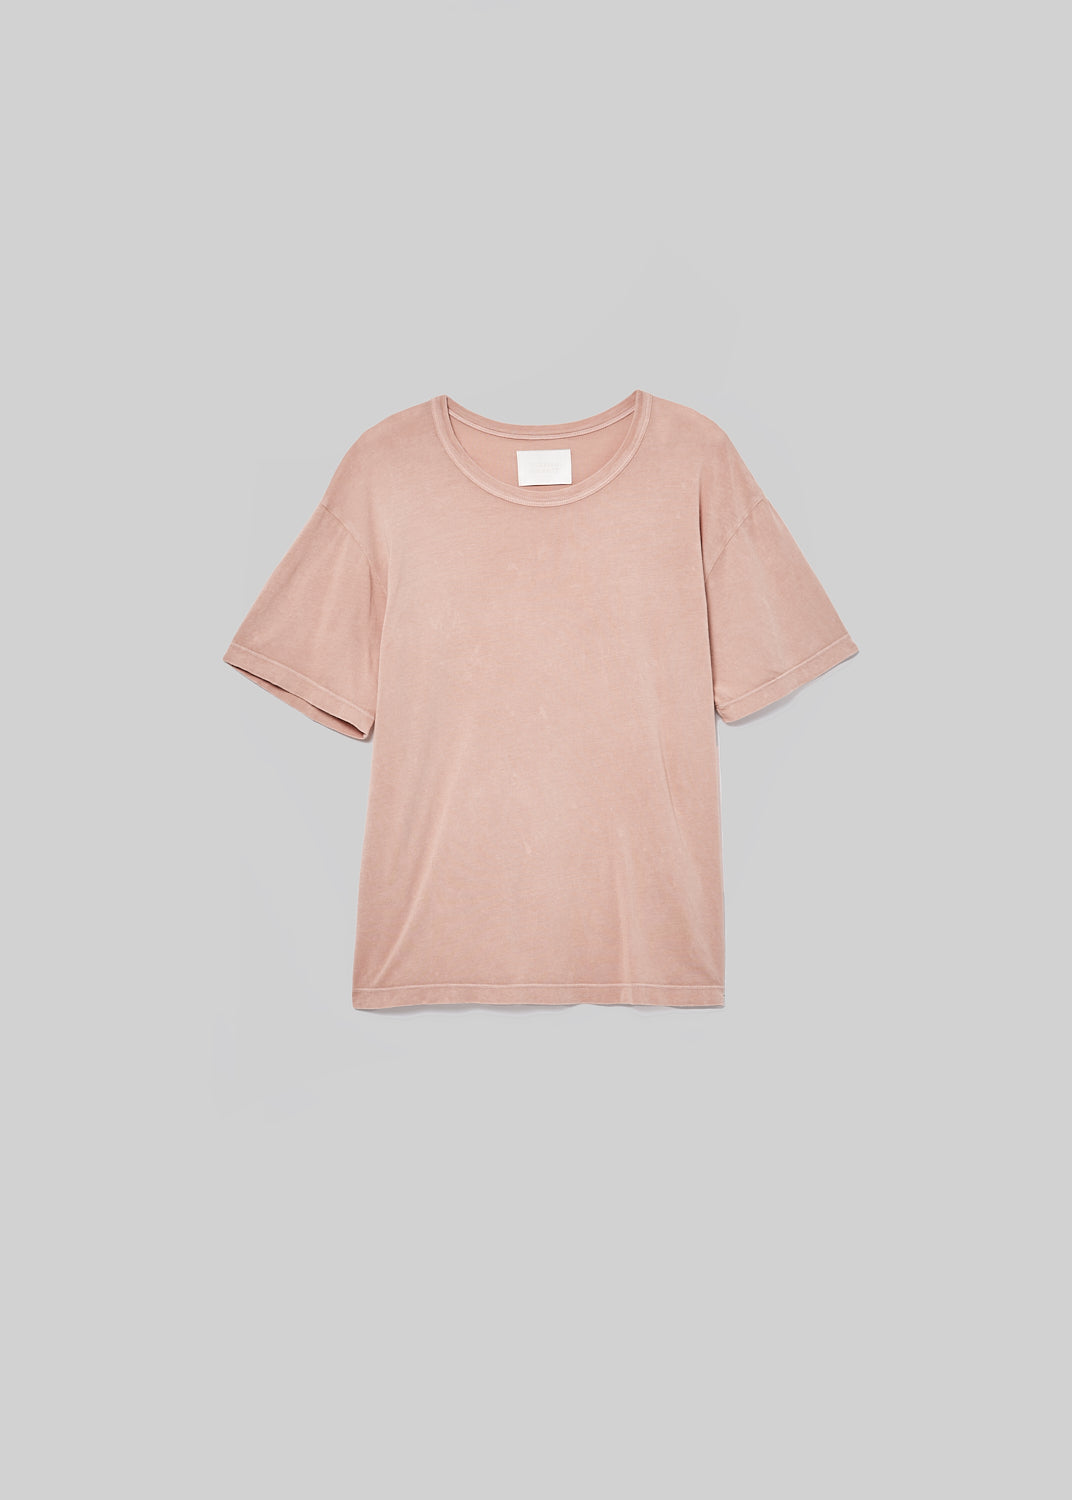 Elisabetta Relaxed Tee in Mineral Roselle